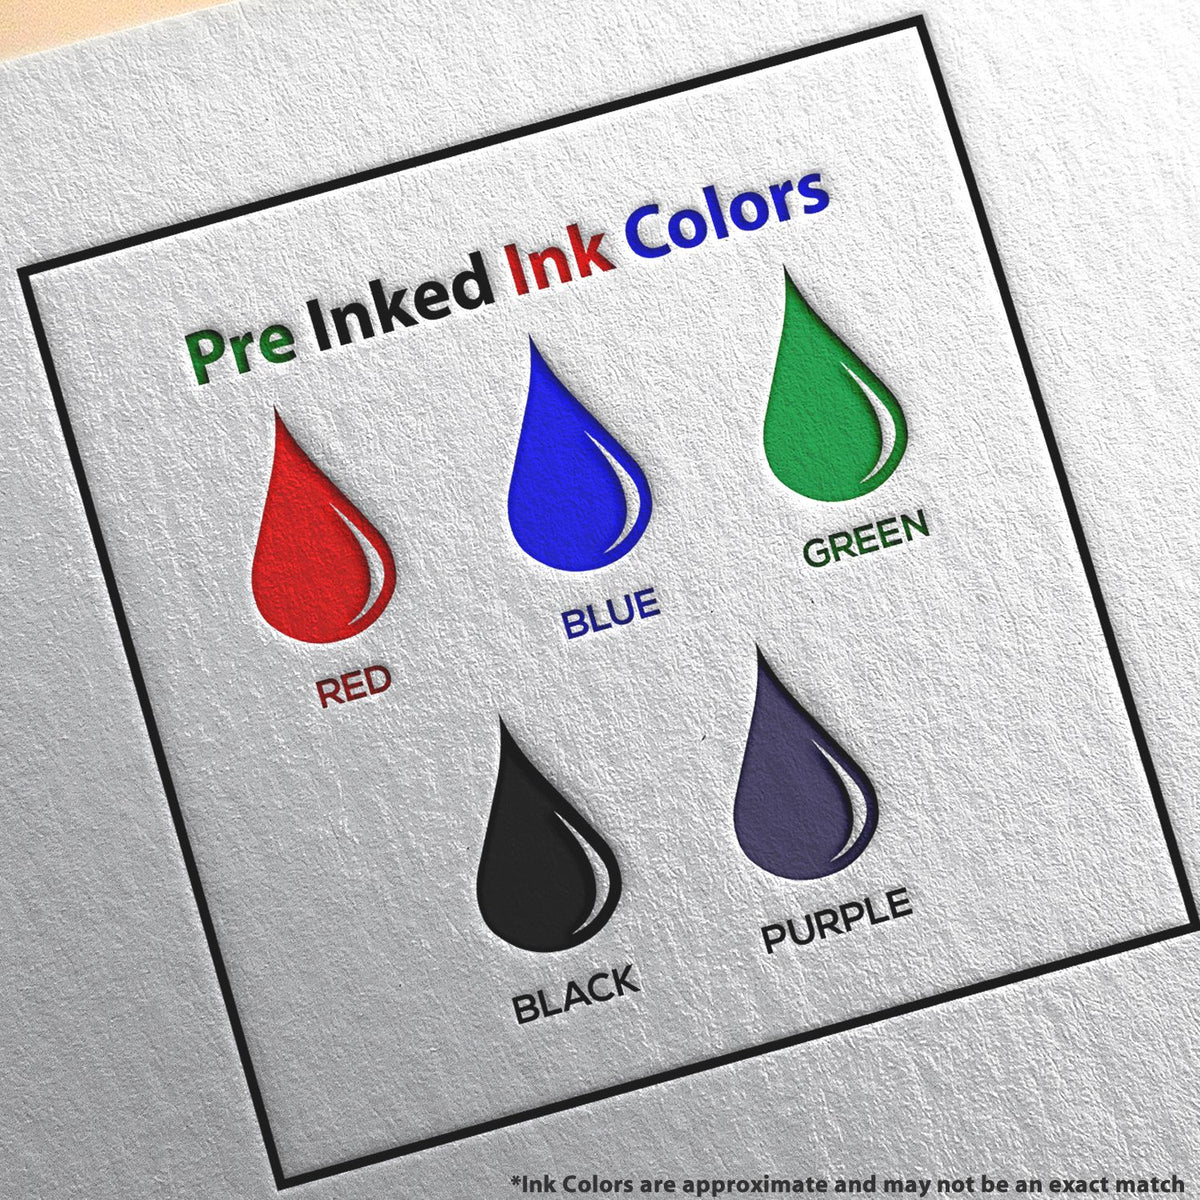 A picture showing the different ink colors or hues available for the Slim Pre-Inked Mississippi Professional Engineer Seal Stamp product.